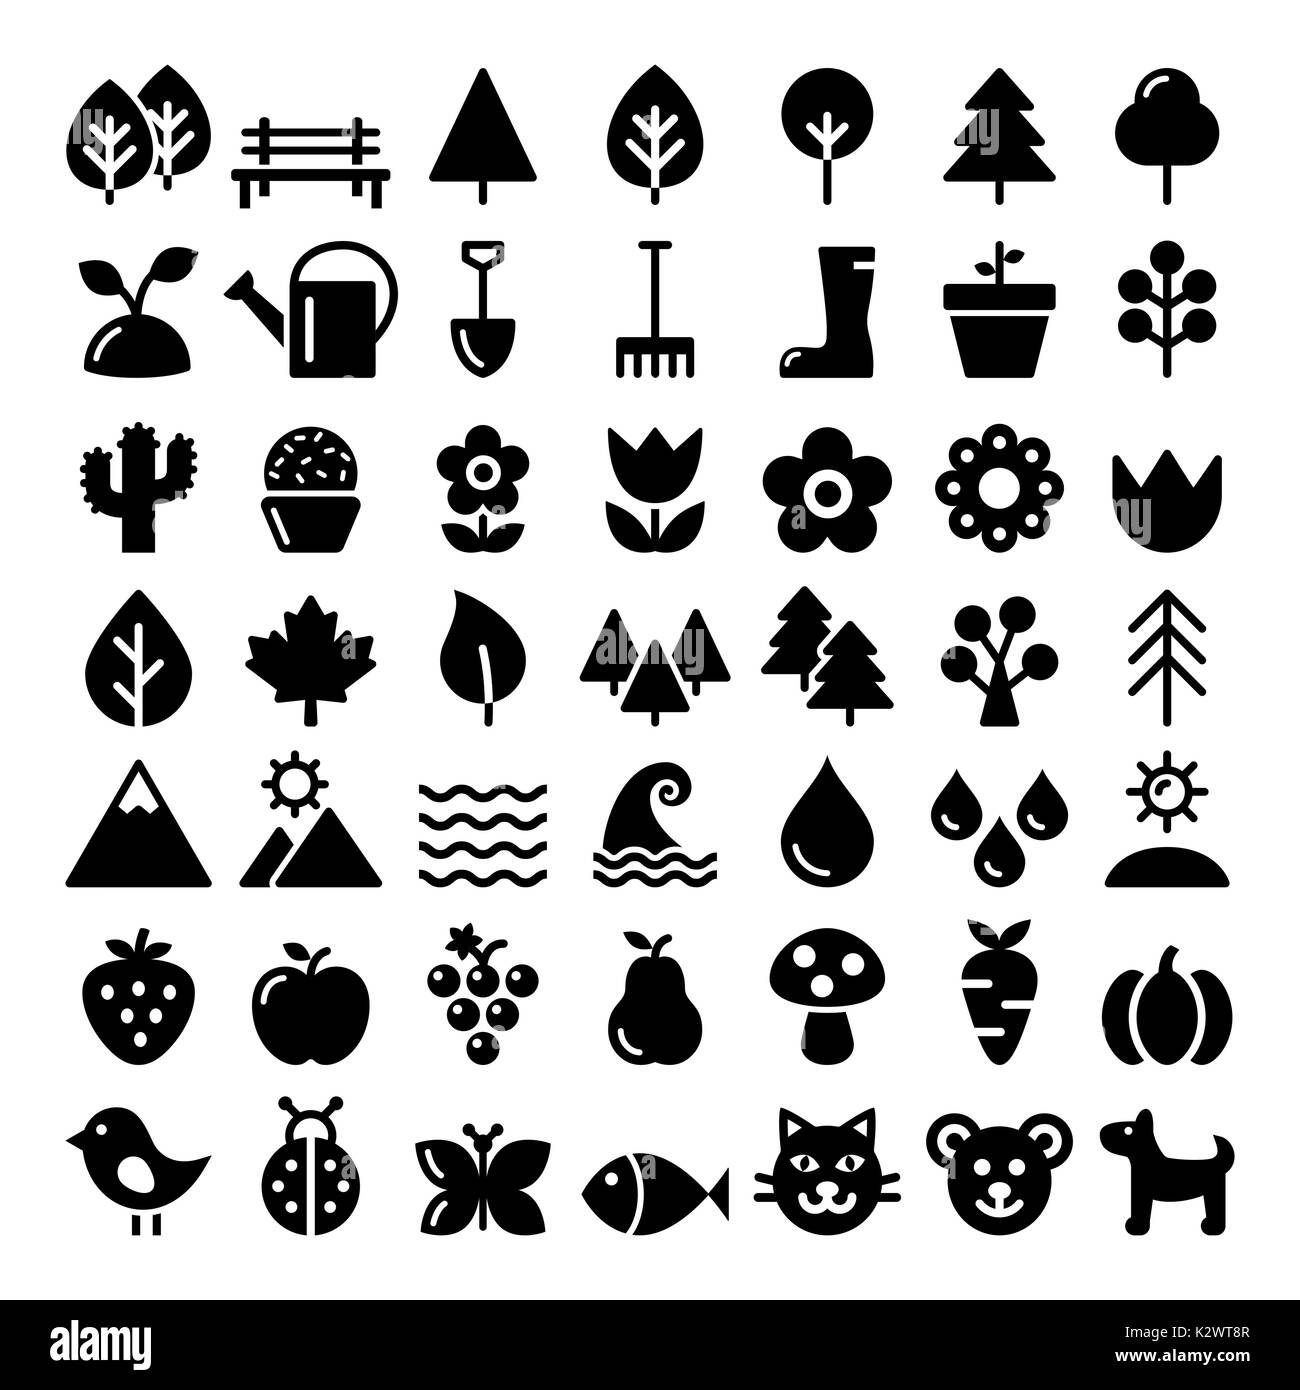 Nature Vector Icons Set, Park, Outdoors Animals, Ecology, Organic Food Design   Big Pack Stock Vector